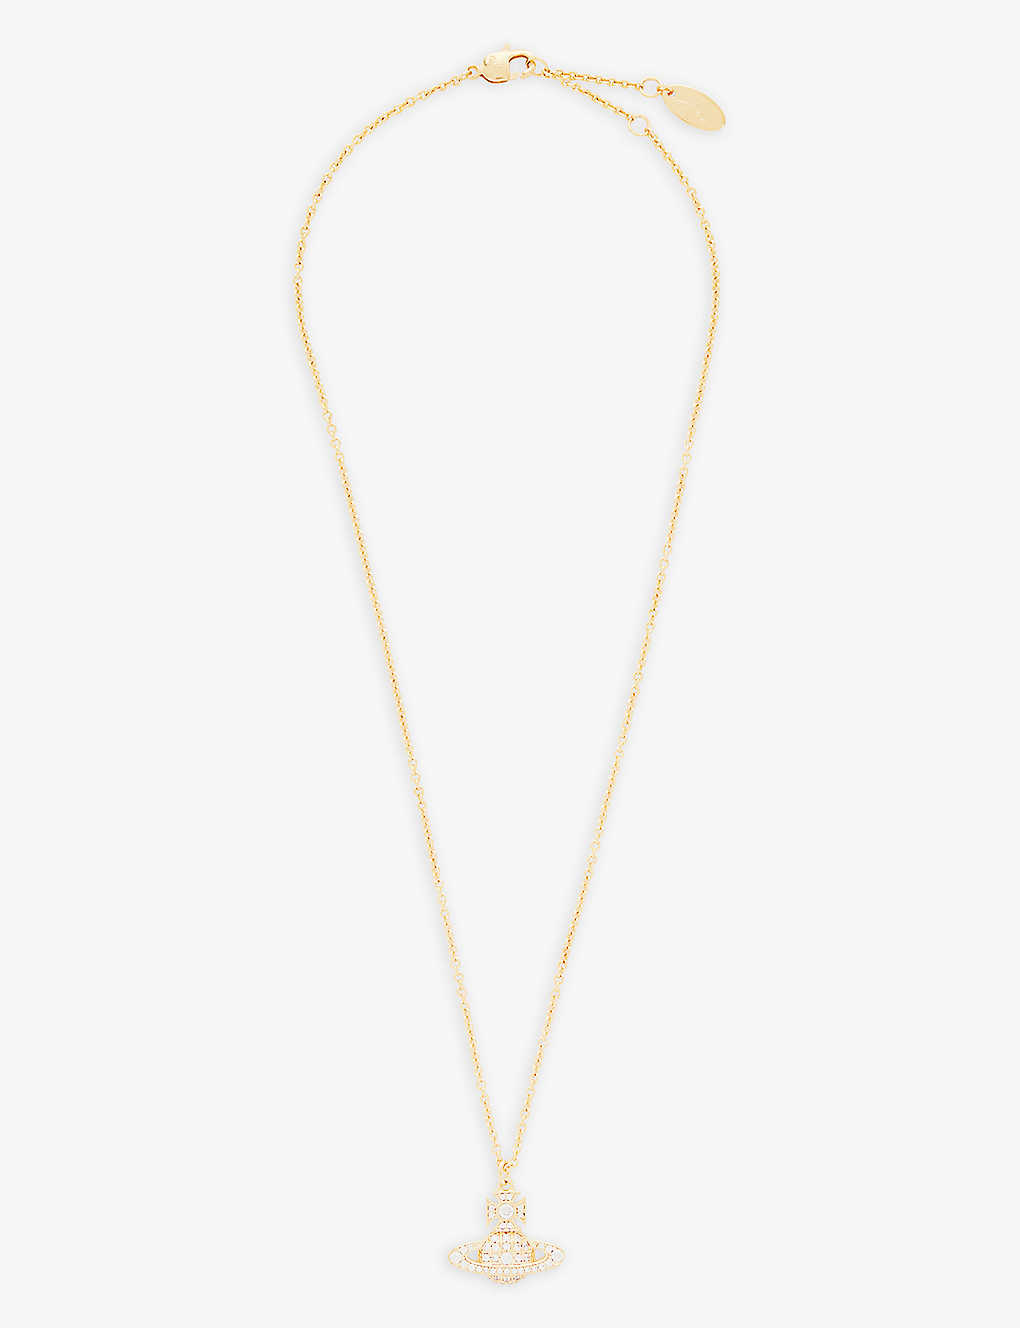 Vivienne Westwood Jewellery Carmela Brass And Cubic Zirconia Necklace In Gold / White Cz